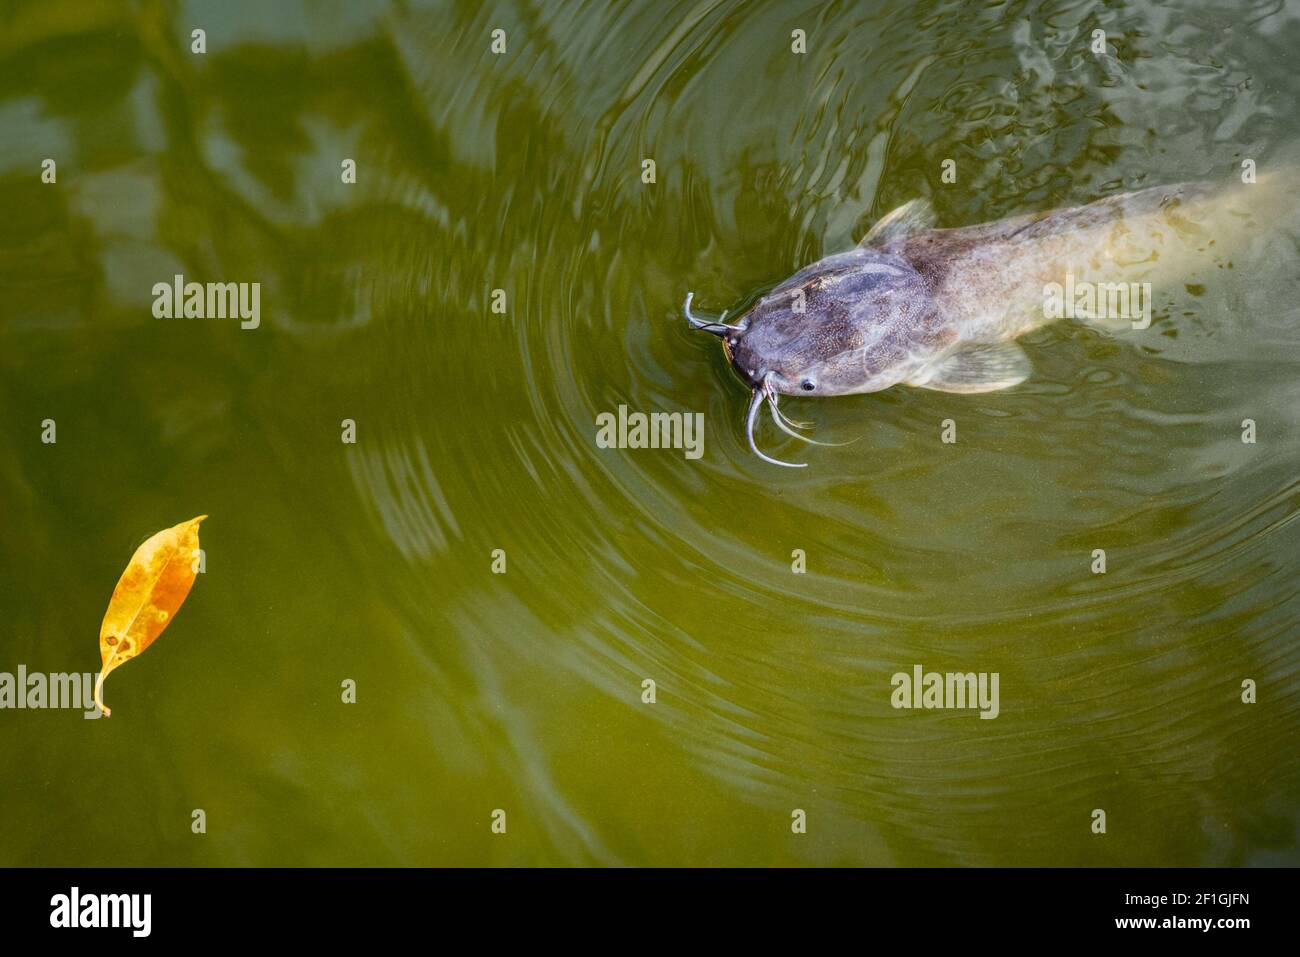 Catfish emerges out of the pond water and stares towards a yellow leaf. Clarias genus. A temple pond of Wat Phai Lom, Trat, Thailand. Stock Photo